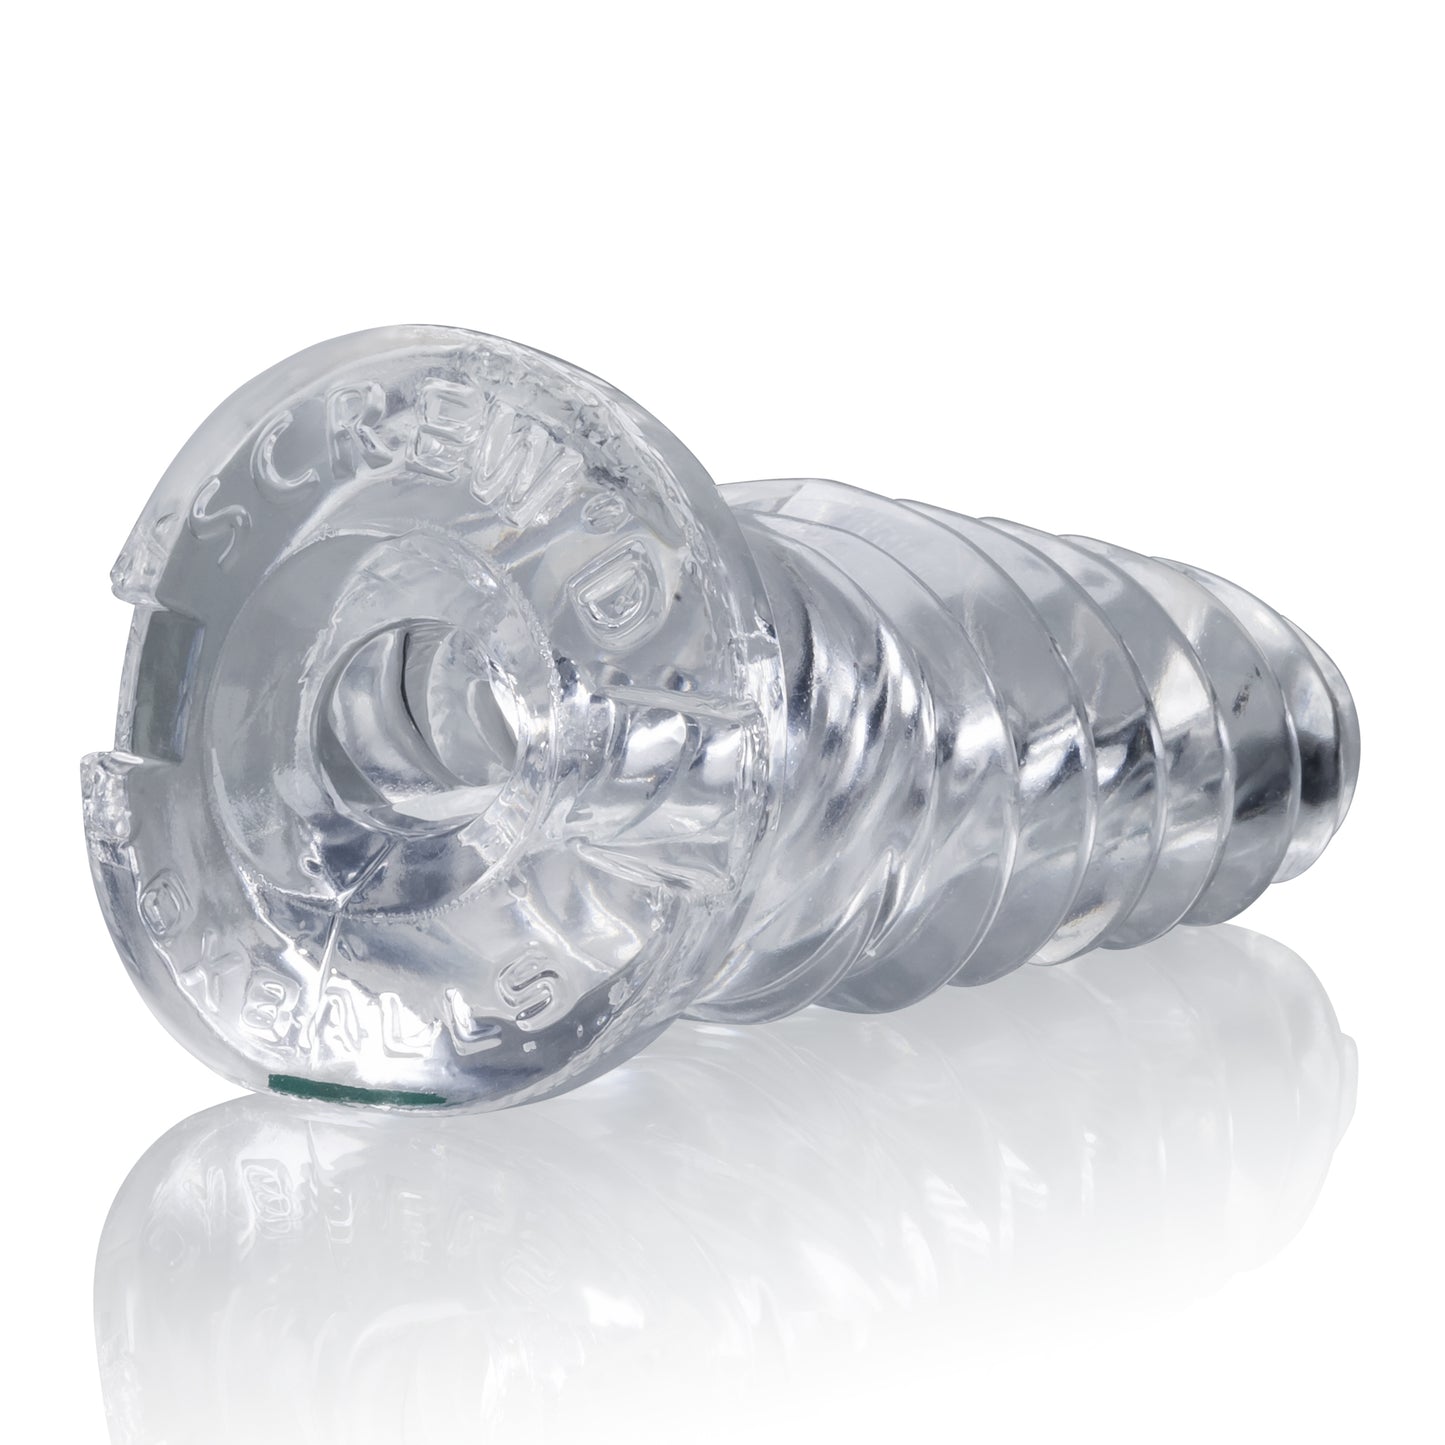 ScrewD Super Squish Corkscrew Jackoff Toy Clear - Just for you desires